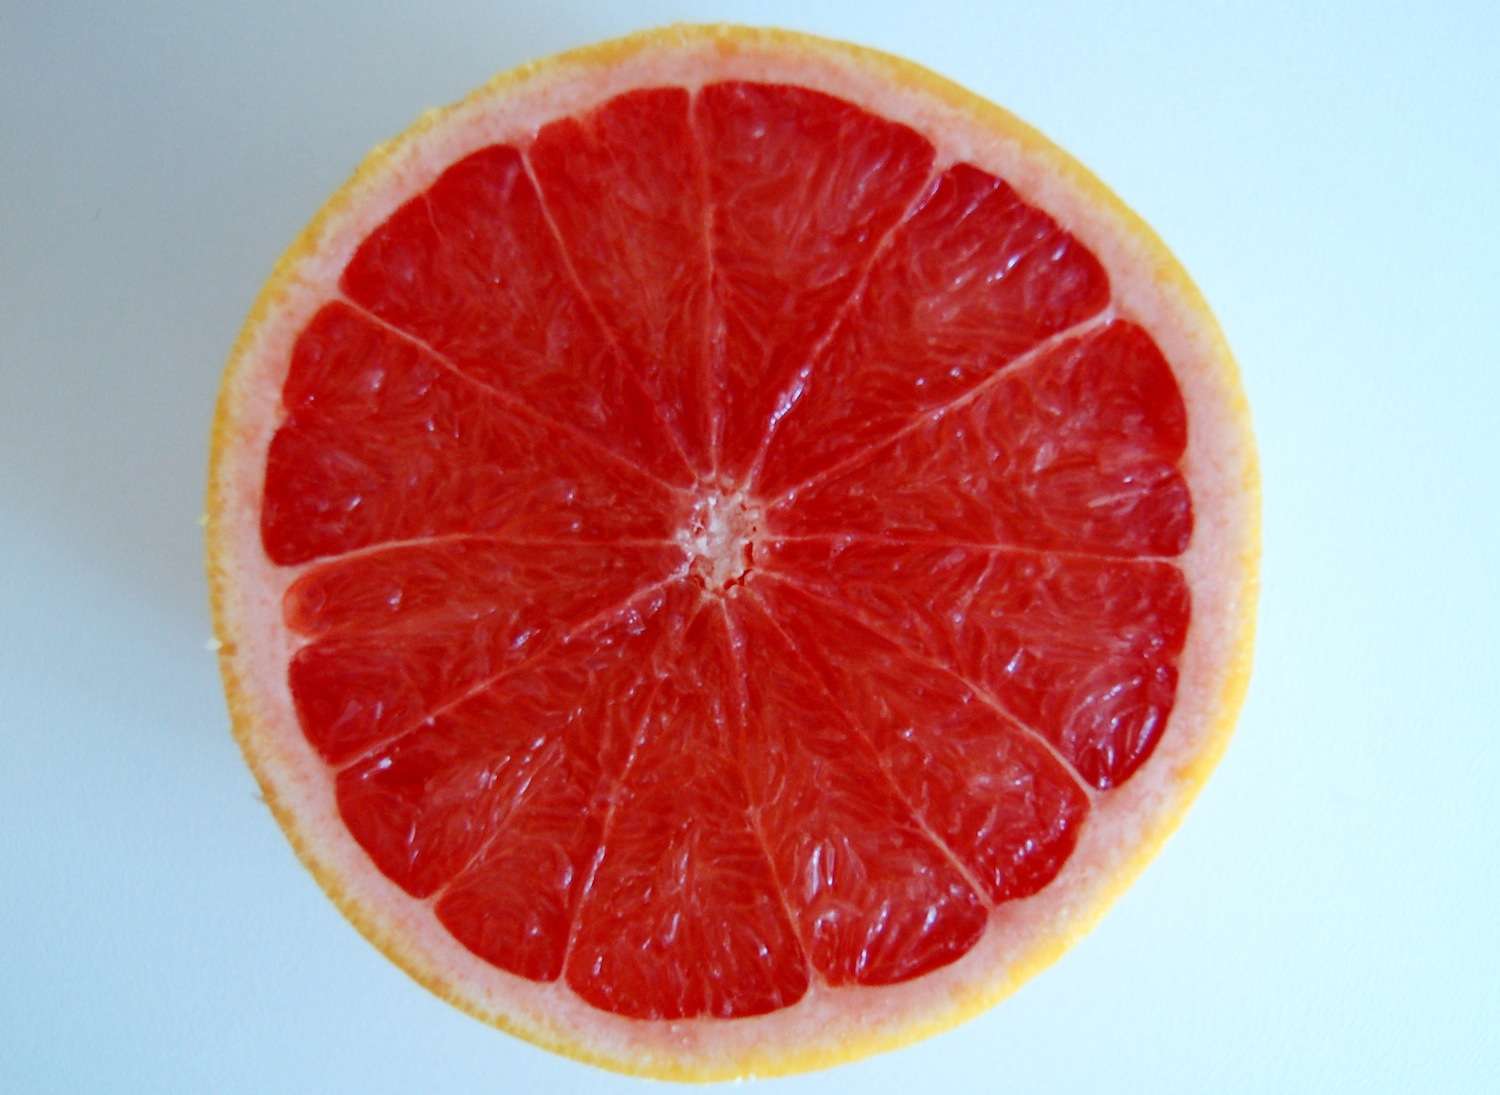 The Iron You: One Grapefruit A Day Helps Lowering Cholesterol, But...